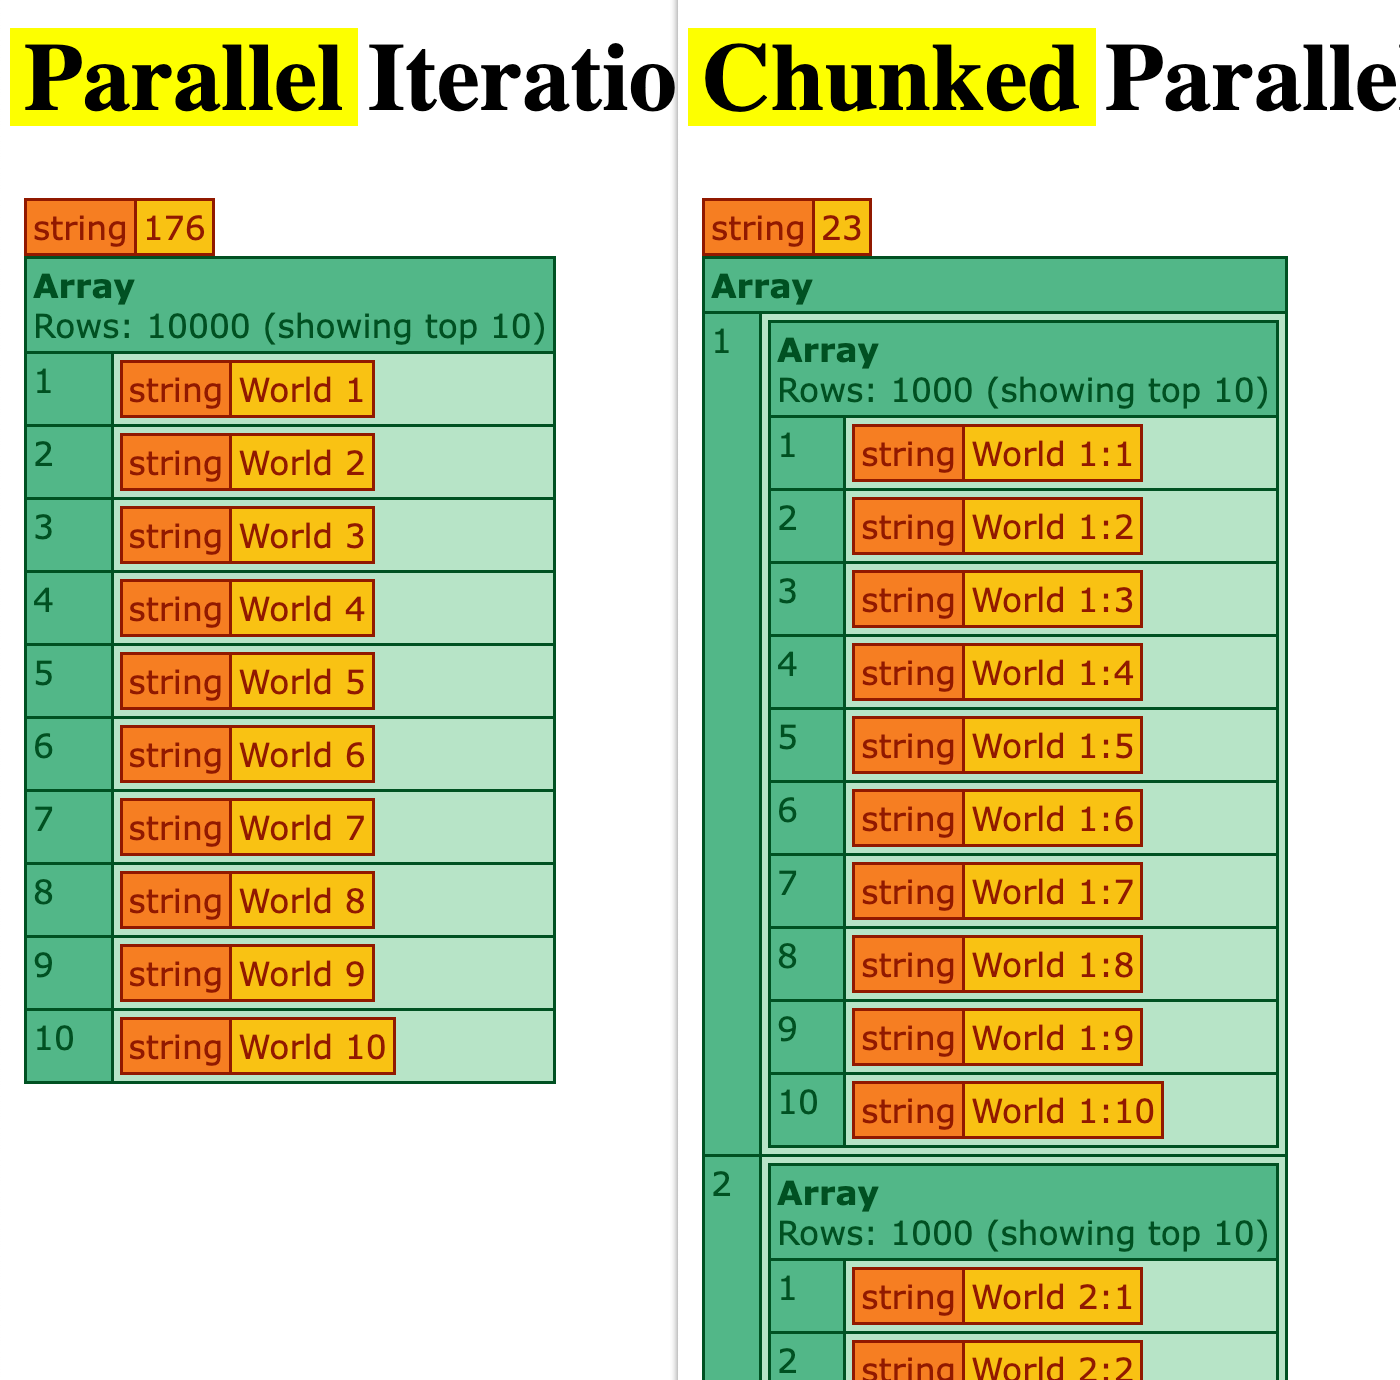 Screenshots of the two tests showing that the plain parallel iteration took about 175 milliseconds to complete and the chunked parallel iteration took about 25 milliseconds to complete.